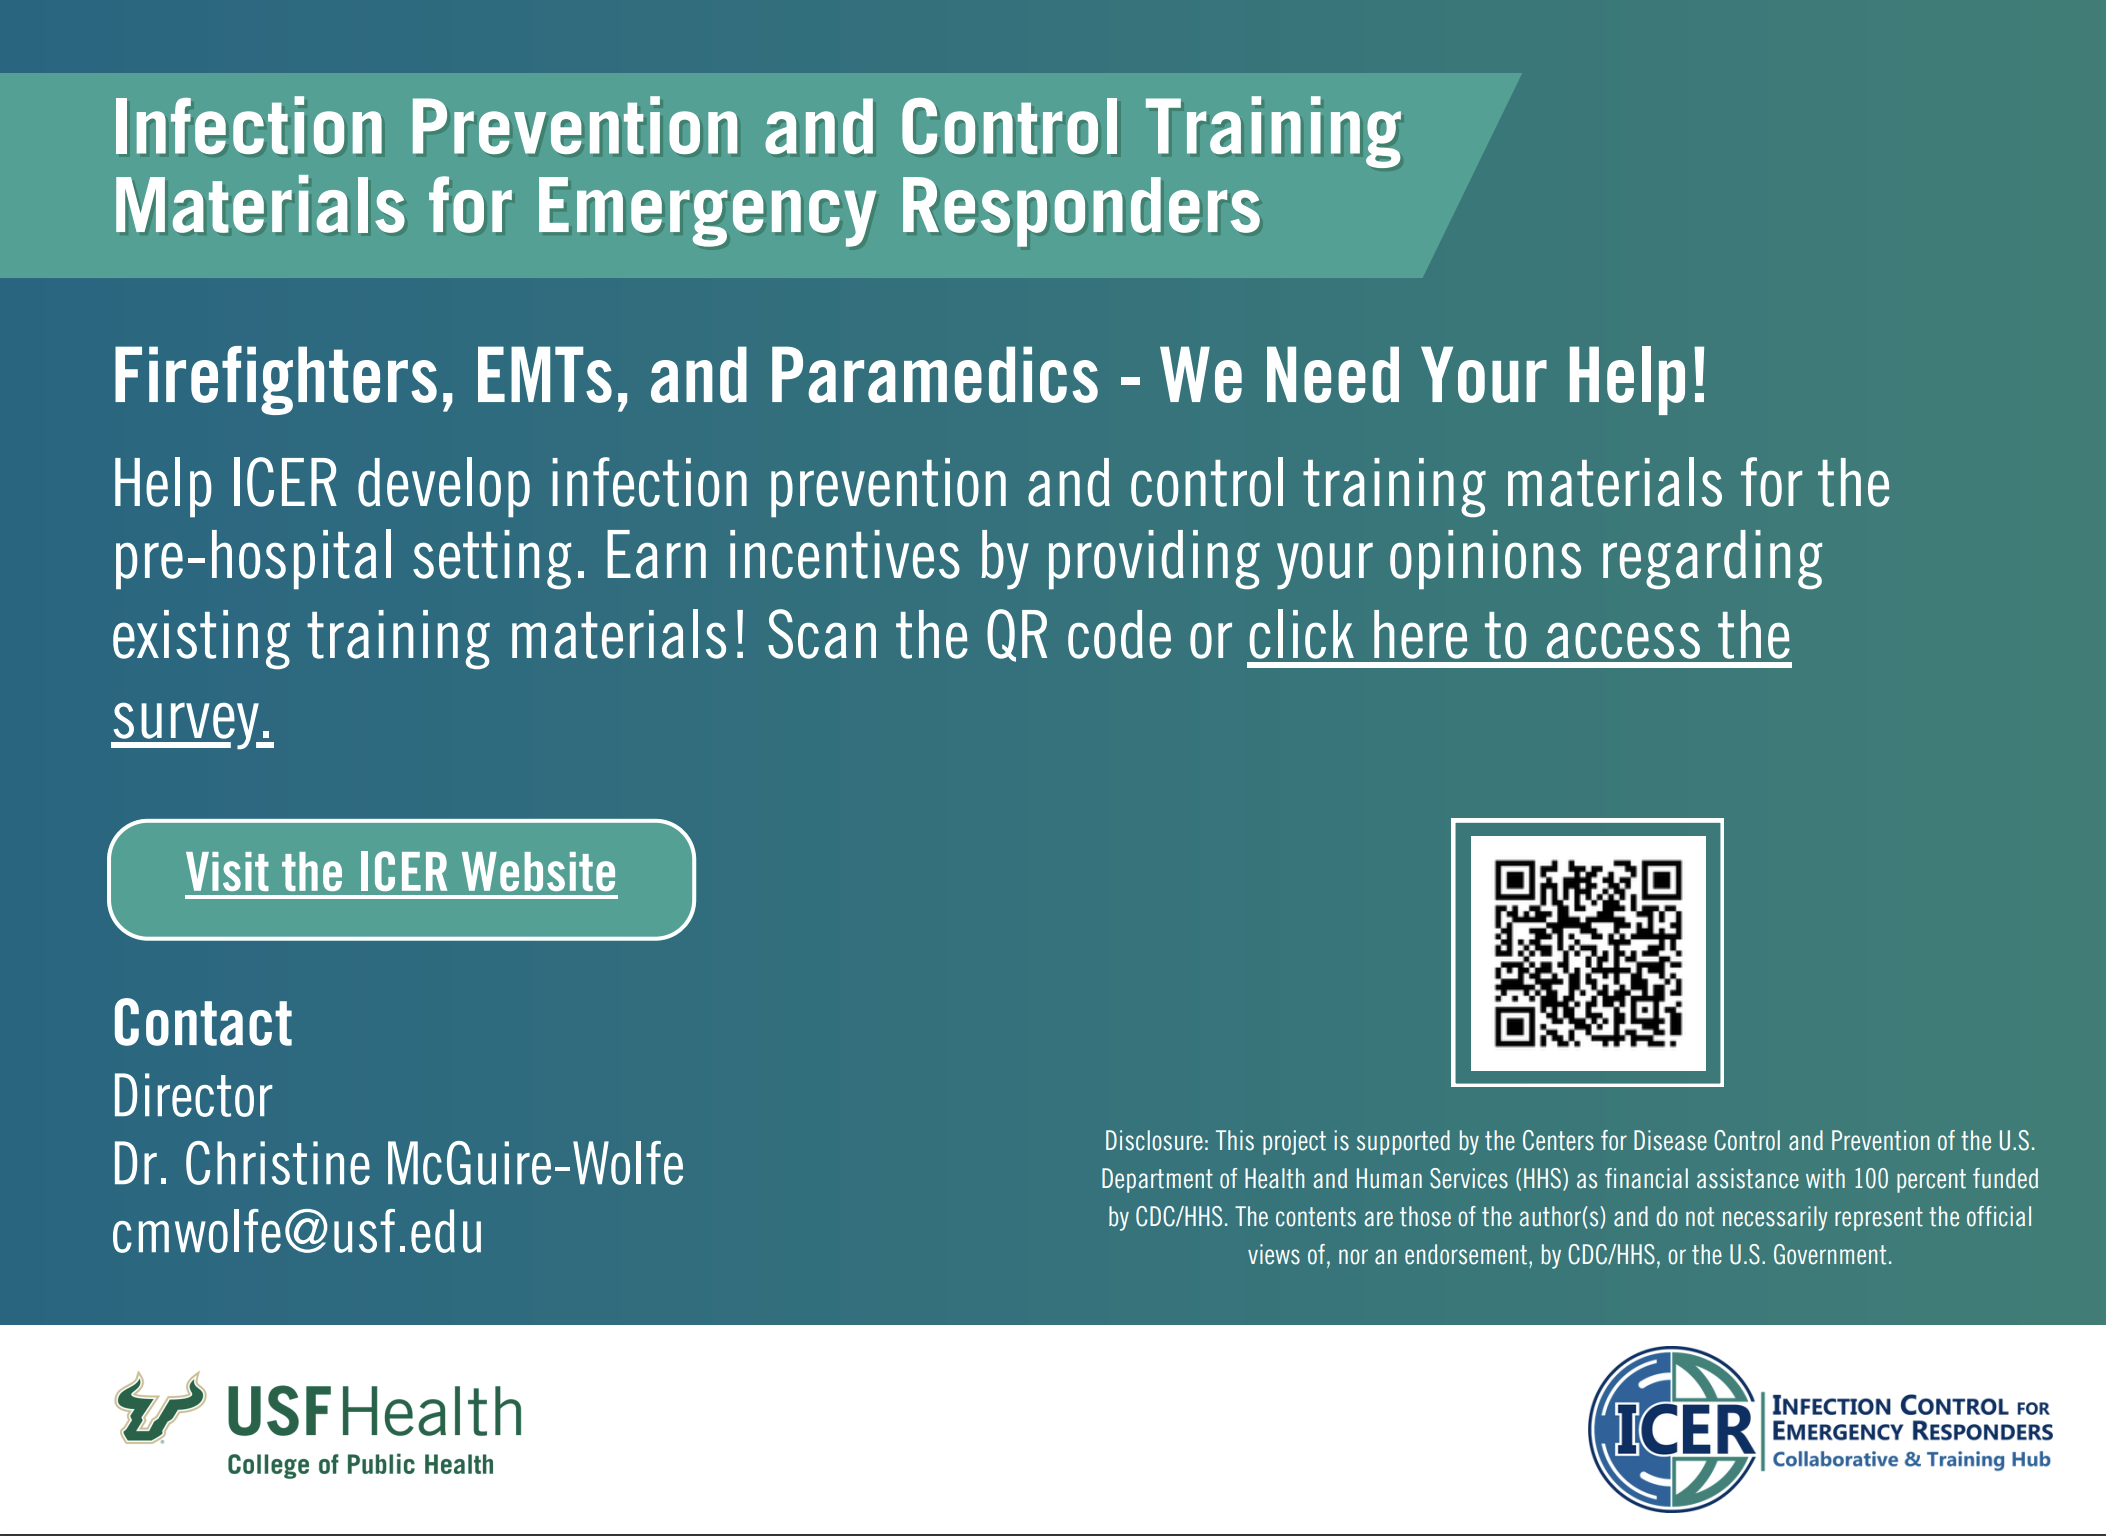 Help ICER develop infection prevention and control training materials for the pre-hospital setting. Earn incentives by providing your opinions regarding existing training materials! Scan the QR code or click on the link below to access the survey.